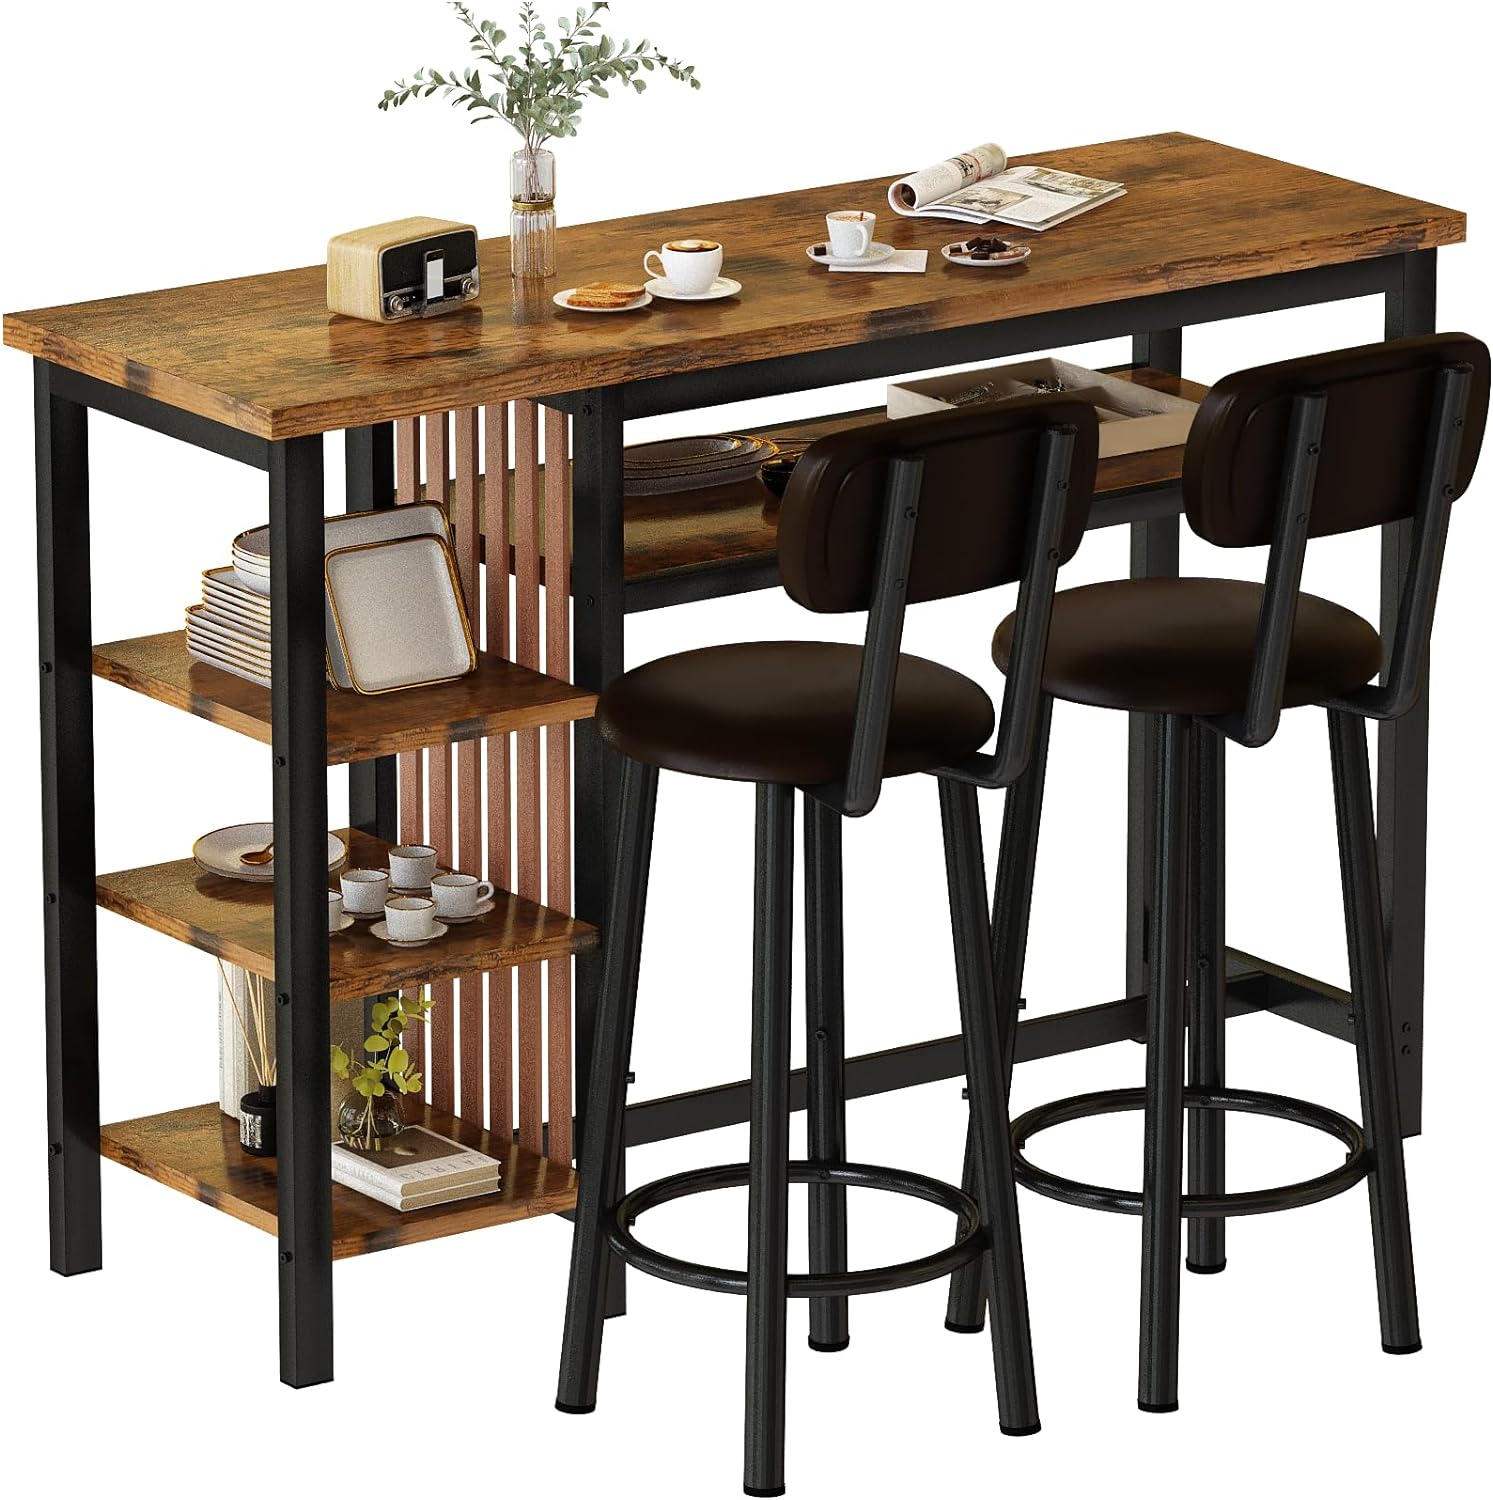 Recaceik Counter Height Dining Set - Bar Table and 2 Upholstered Stools with Storage Shelves, Kitchen Breakfast Nook Pub Set